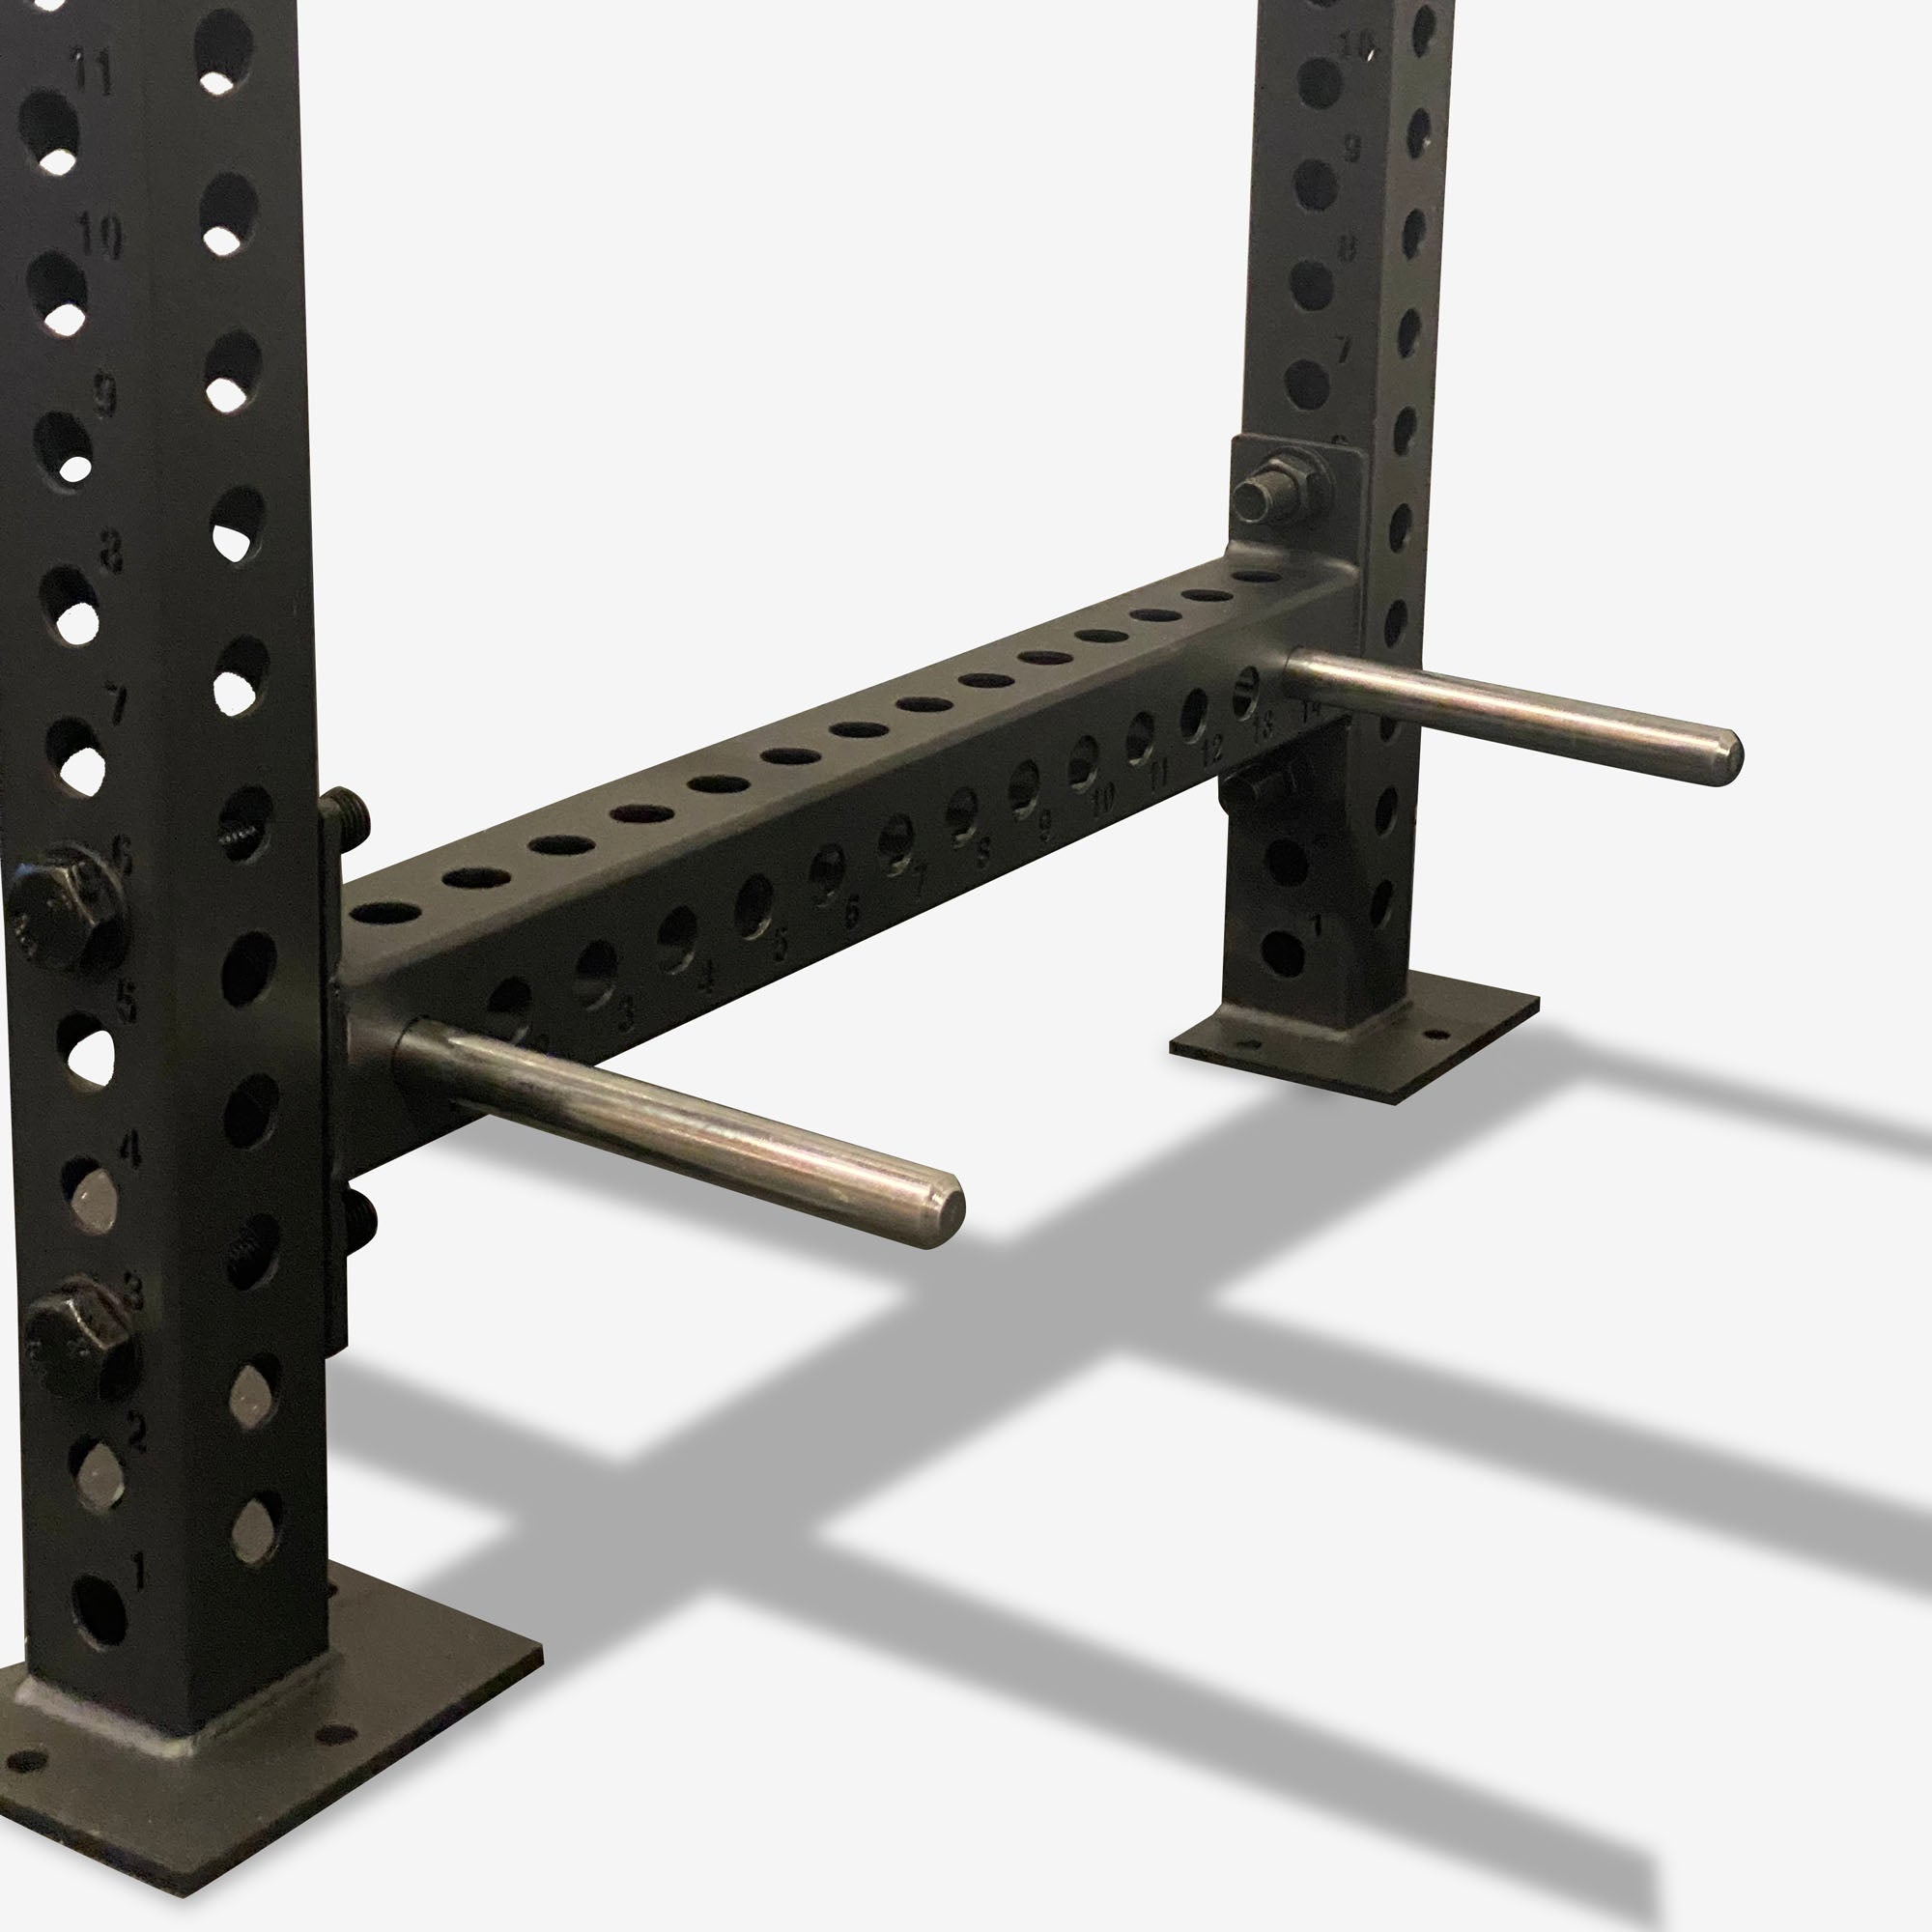 Band Pegs for Power Rack - Again Faster